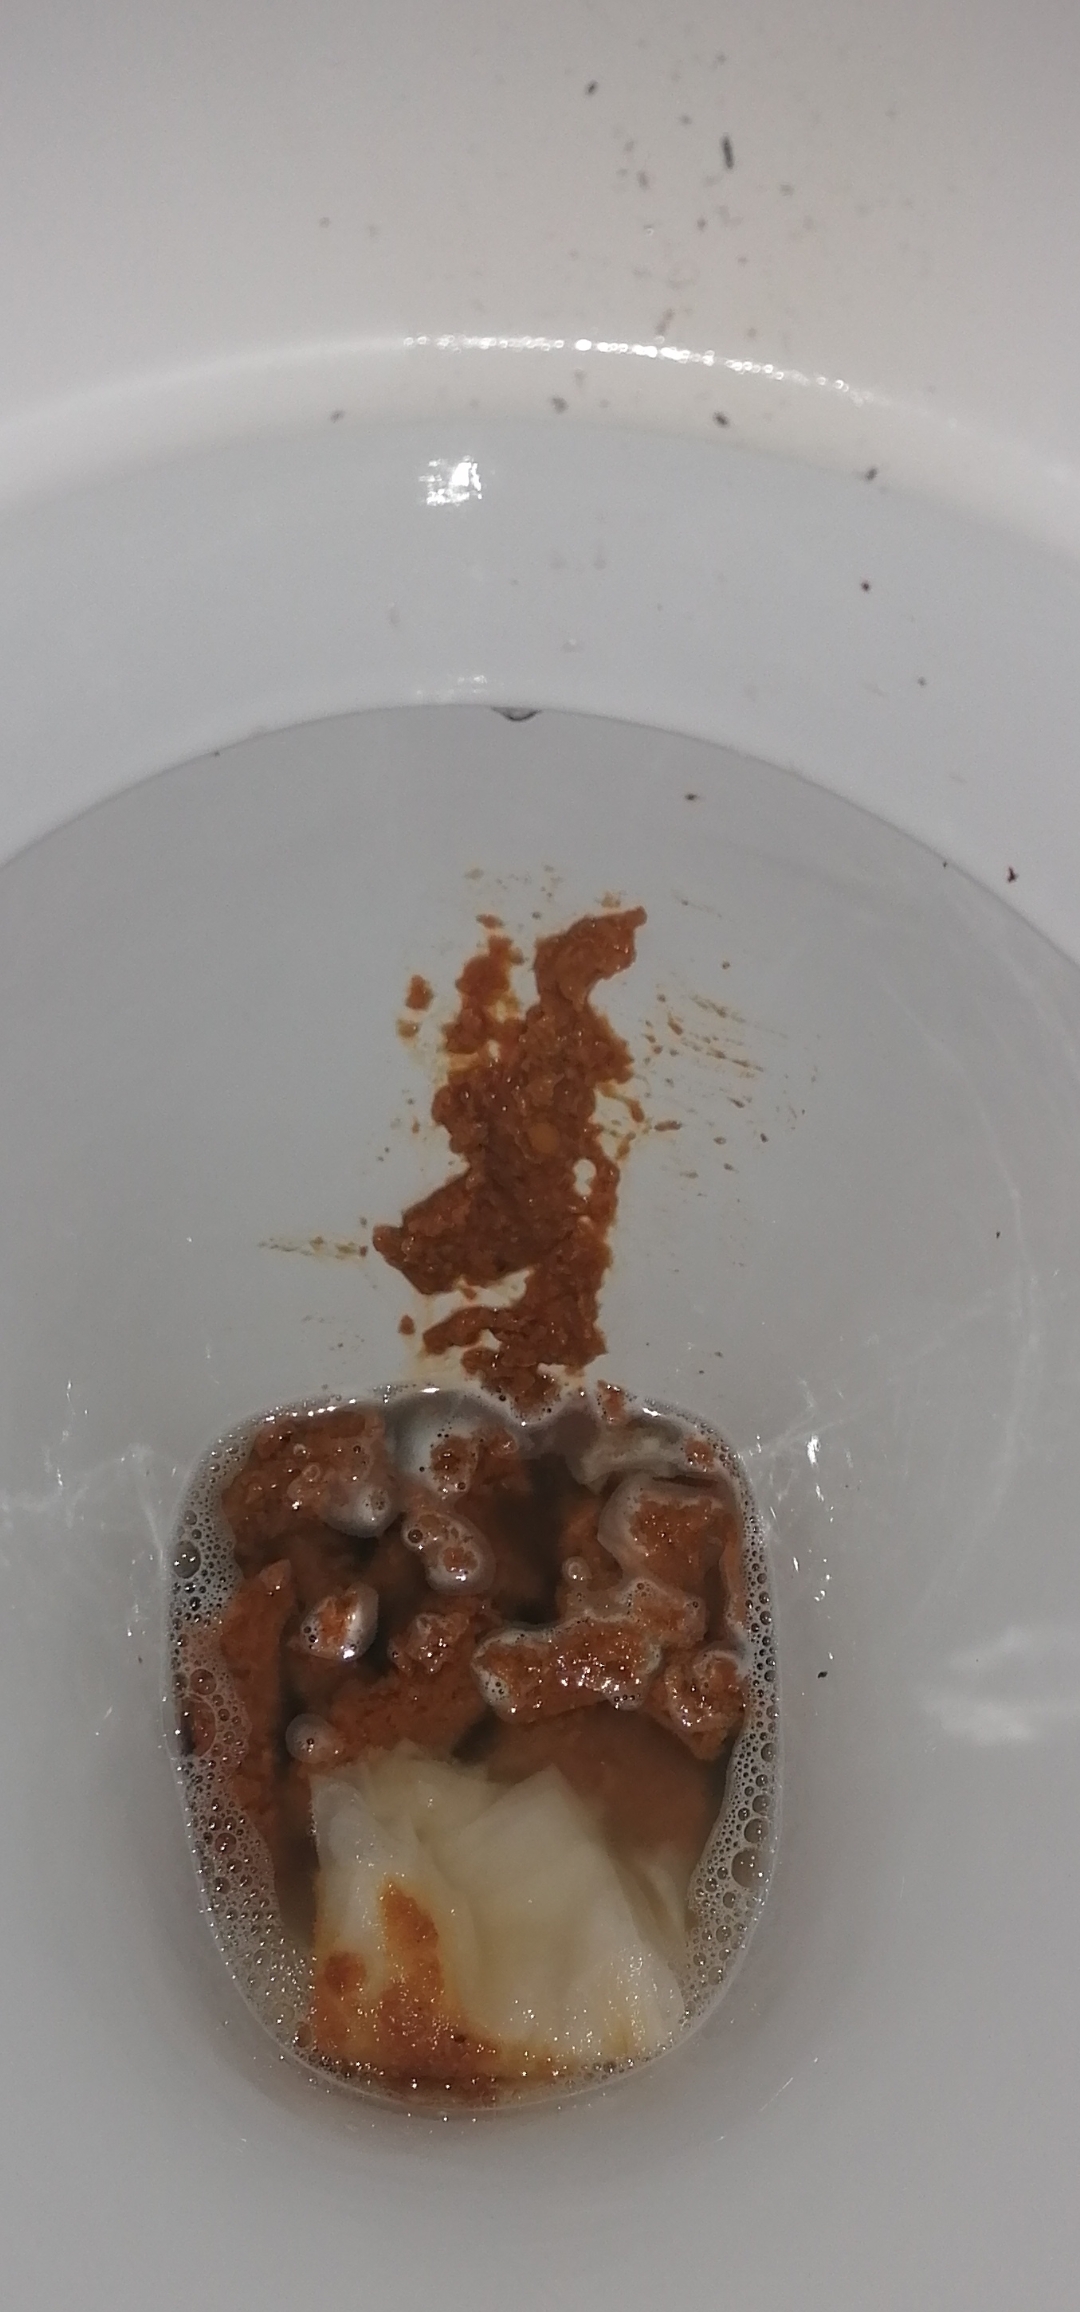 Very desperate shit after work on mates toilet